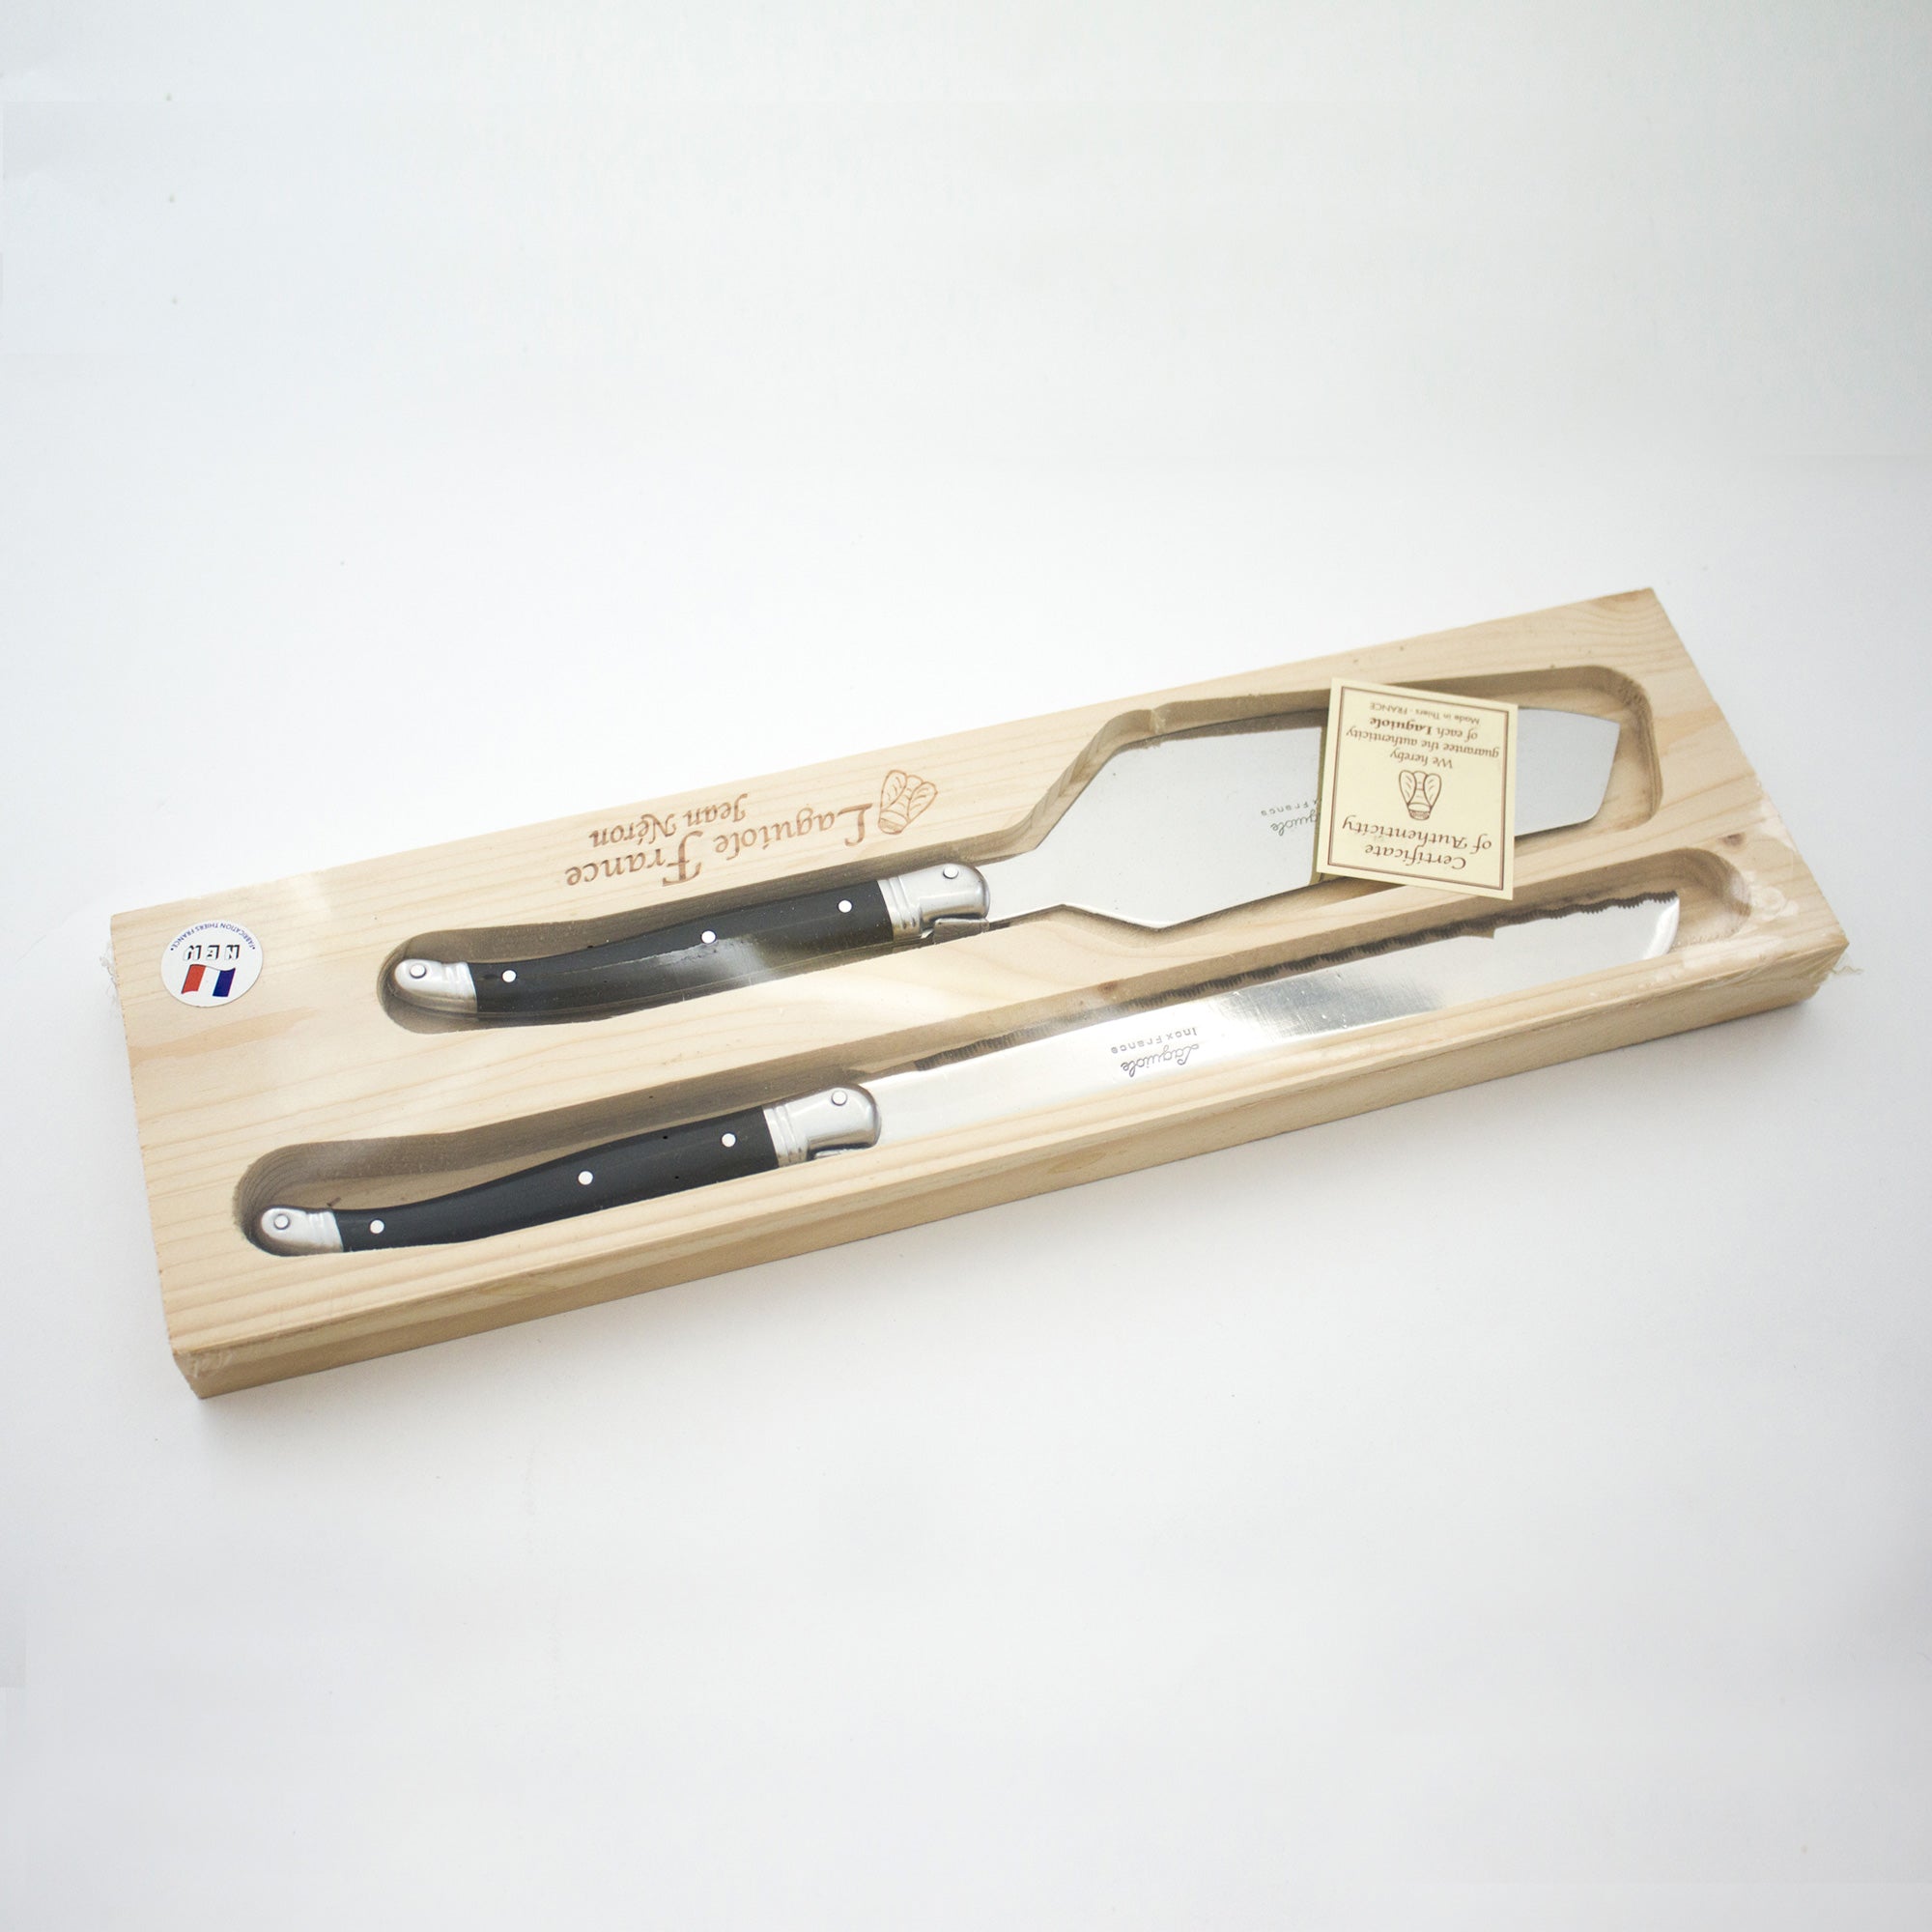 Laguiole Black Cake Set in Wood Box (Cake Slicer and Bread Knife) Cutlery Laguiole Brand_Laguiole Kitchen_Dinnerware Kitchen_Kitchenware Knife Sets Laguiole Serveware Spring Collection cake-black